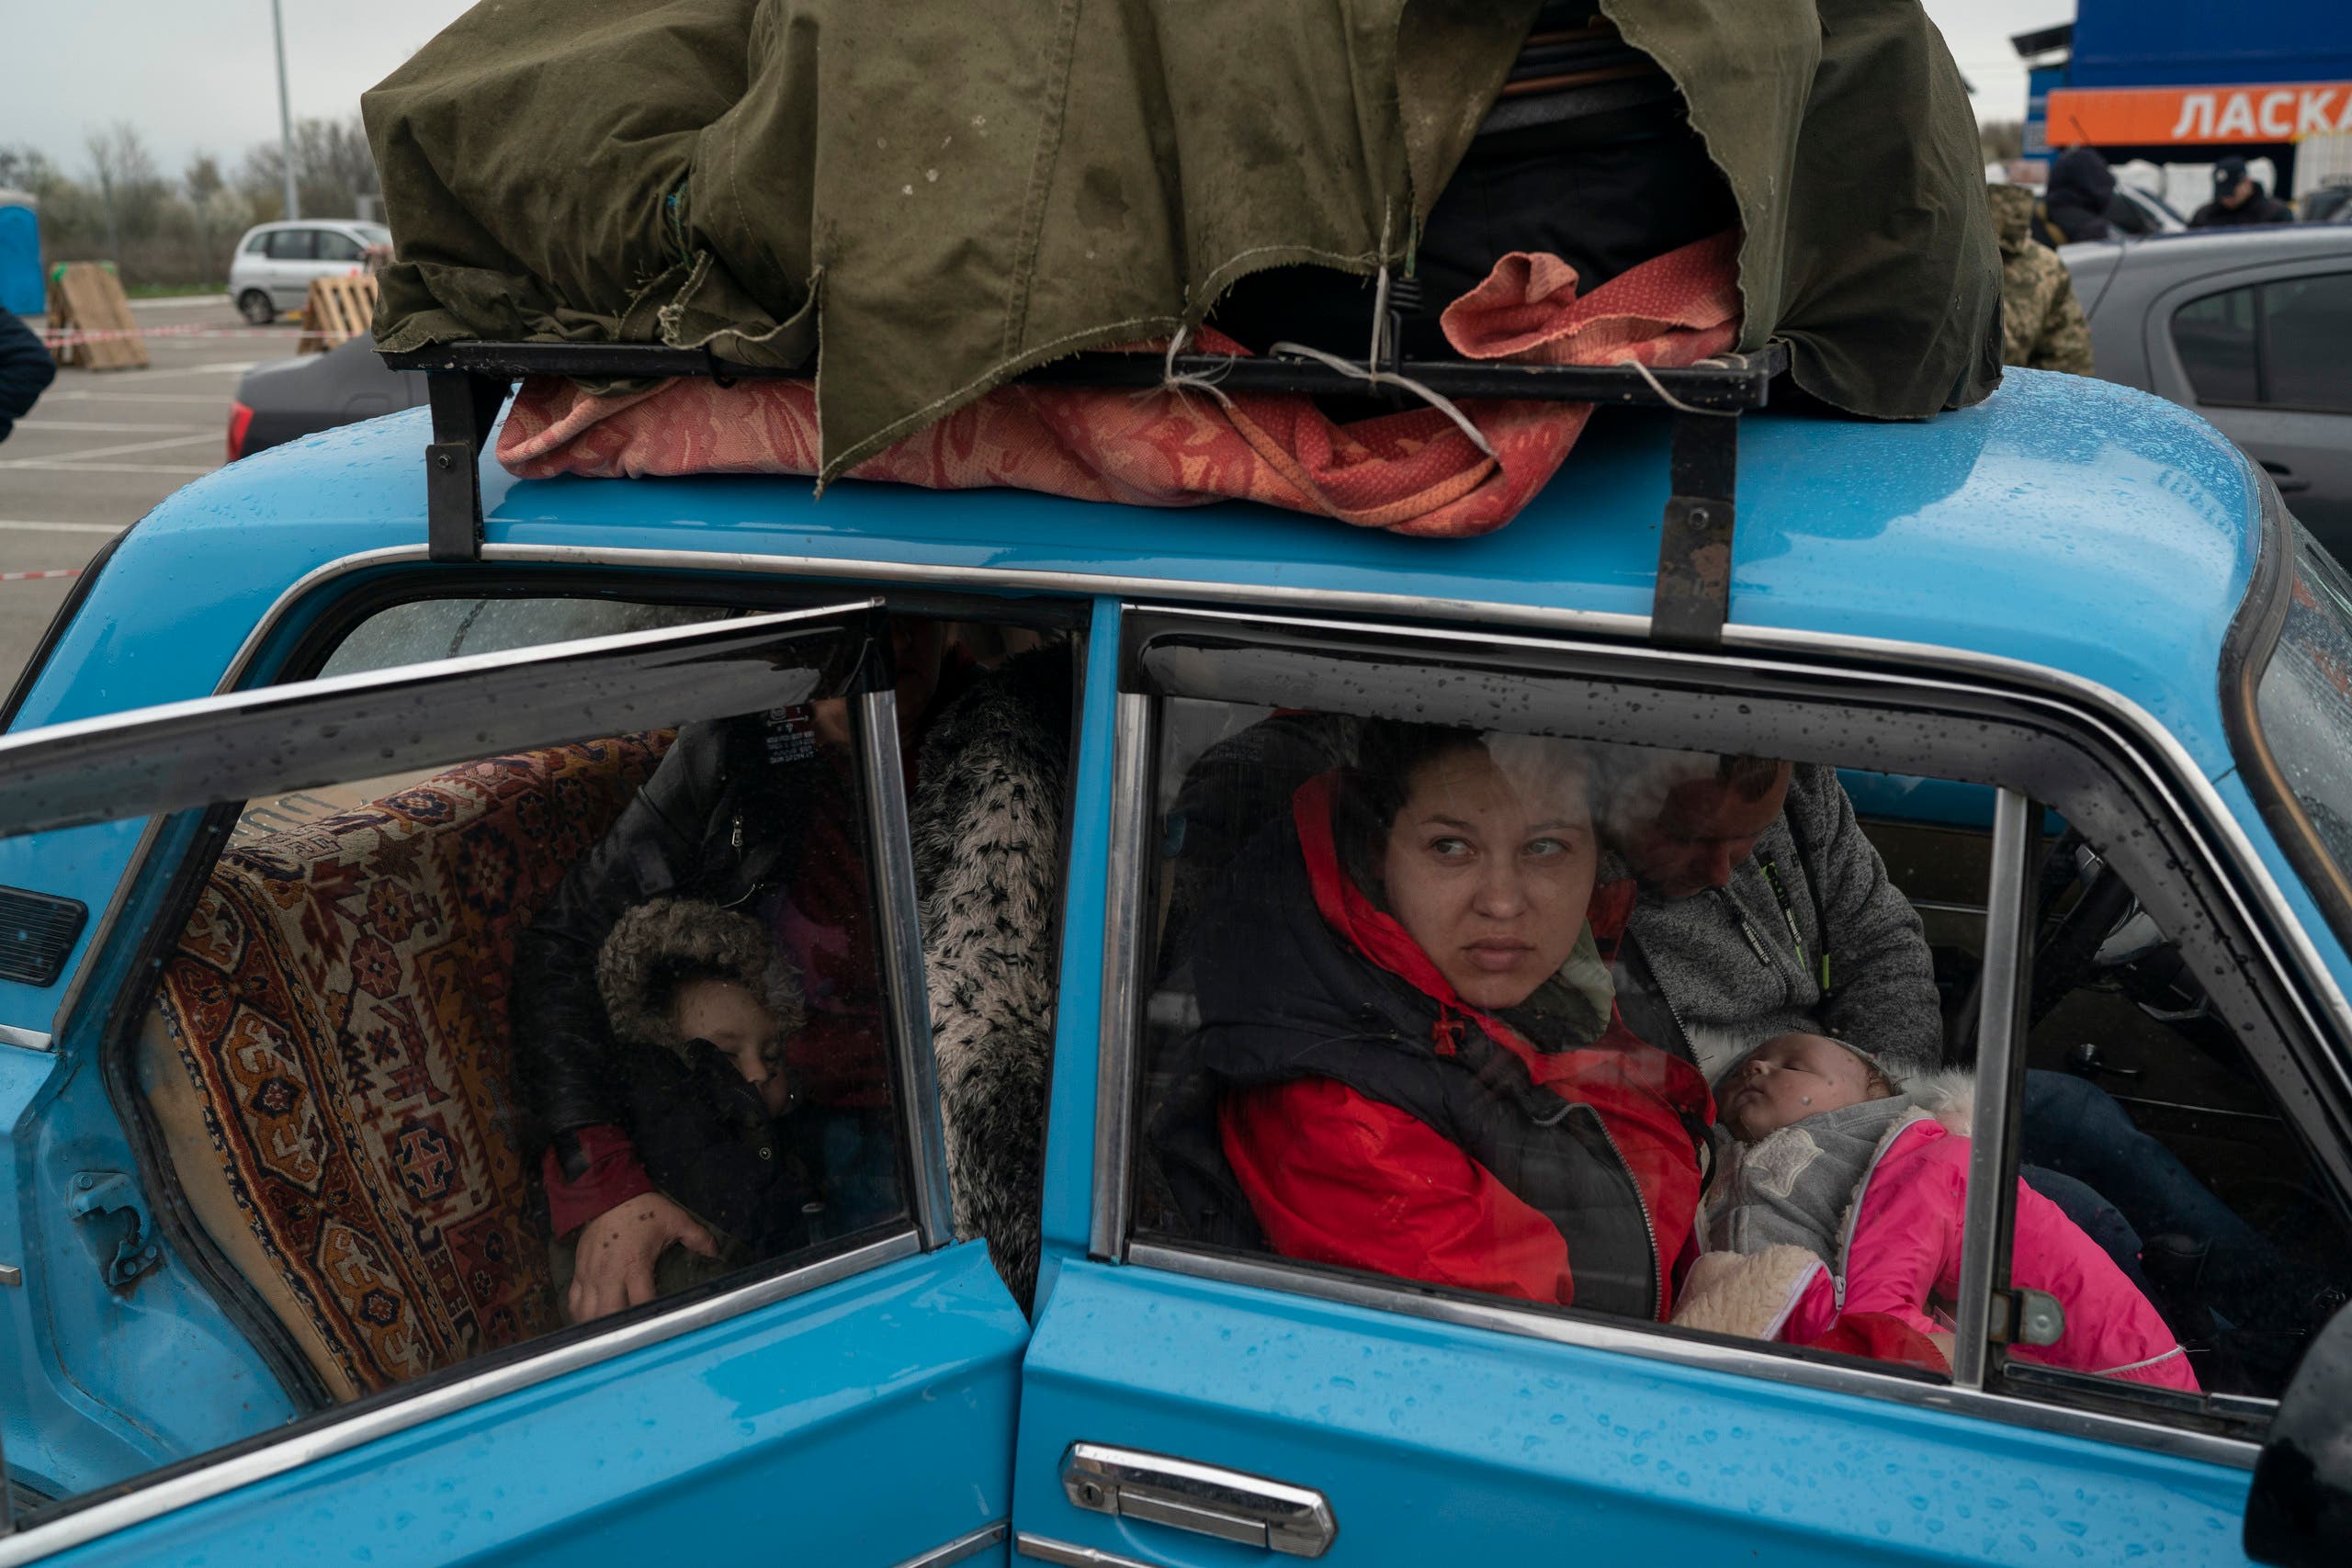 Residents displaced from Mariupol because of the fighting